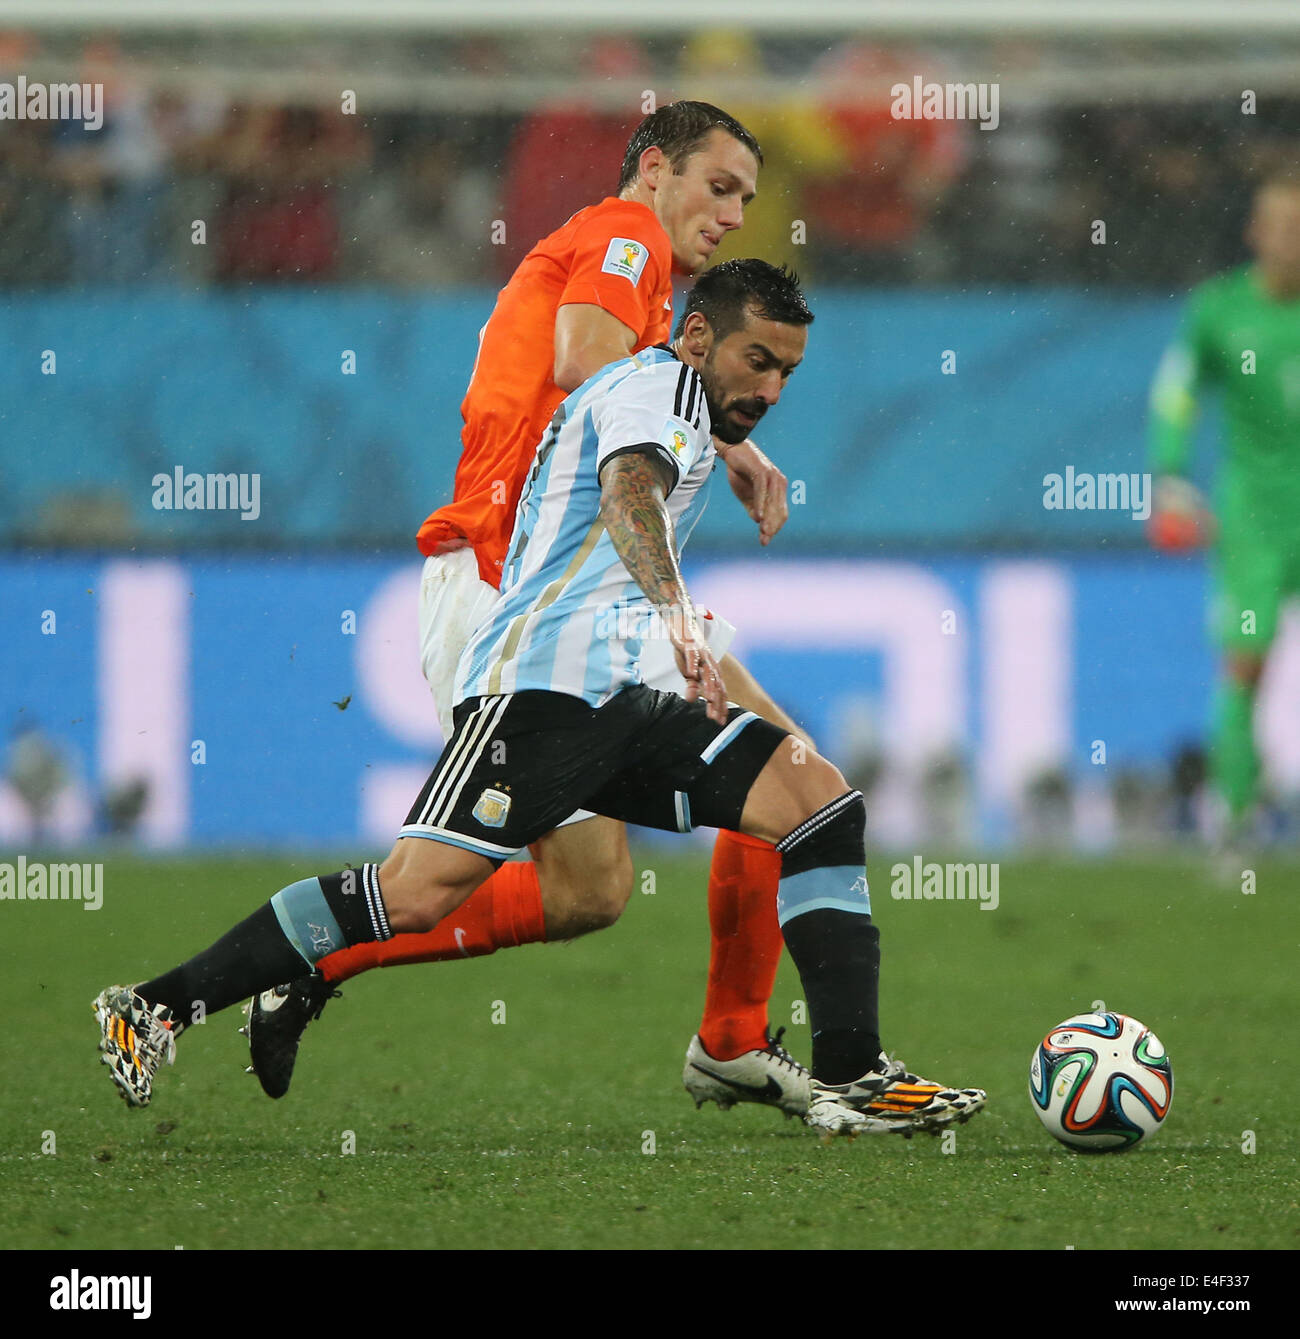 Sao Paulo, Brazil. 9th July, 2014. Netherlands' Stefan de Vrij vies with Argentina's Ezequiel Garay during a semifinal match between Netherlands and Argentina of 2014 FIFA World Cup at the Arena de Sao Paulo Stadium in Sao Paulo, Brazil, on July 9, 2014. Credit:  Xu Zijian/Xinhua/Alamy Live News Stock Photo